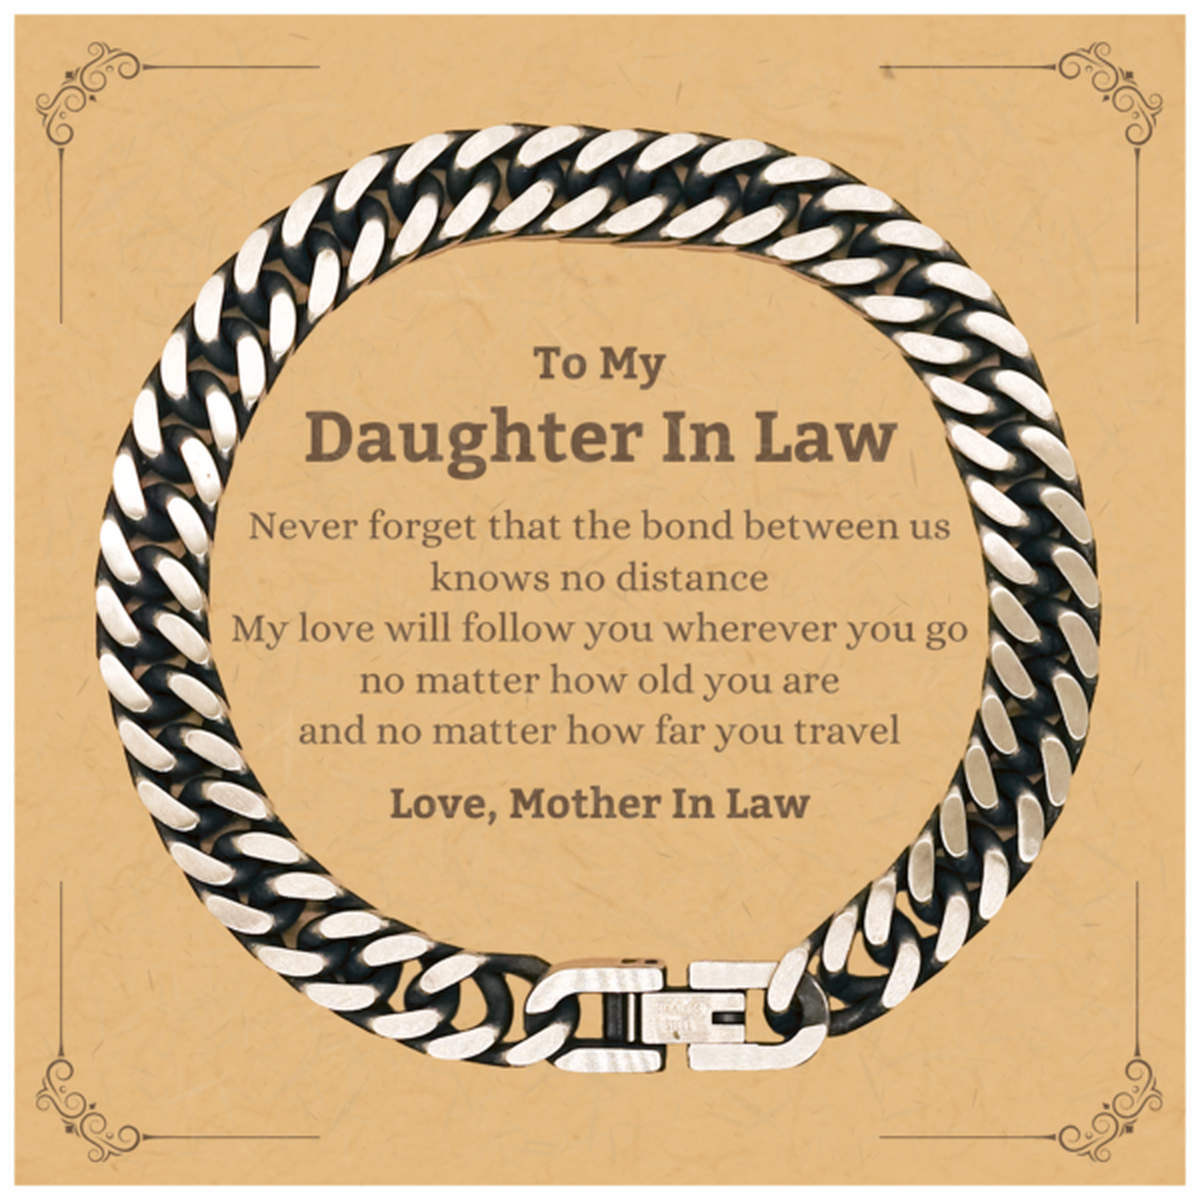 Daughter In Law Birthday Gifts from Mother In Law, Adjustable Cuban Link Chain Bracelet for Daughter In Law Christmas Graduation Unique Gifts Daughter In Law Never forget that the bond between us knows no distance. Love, Mother In Law